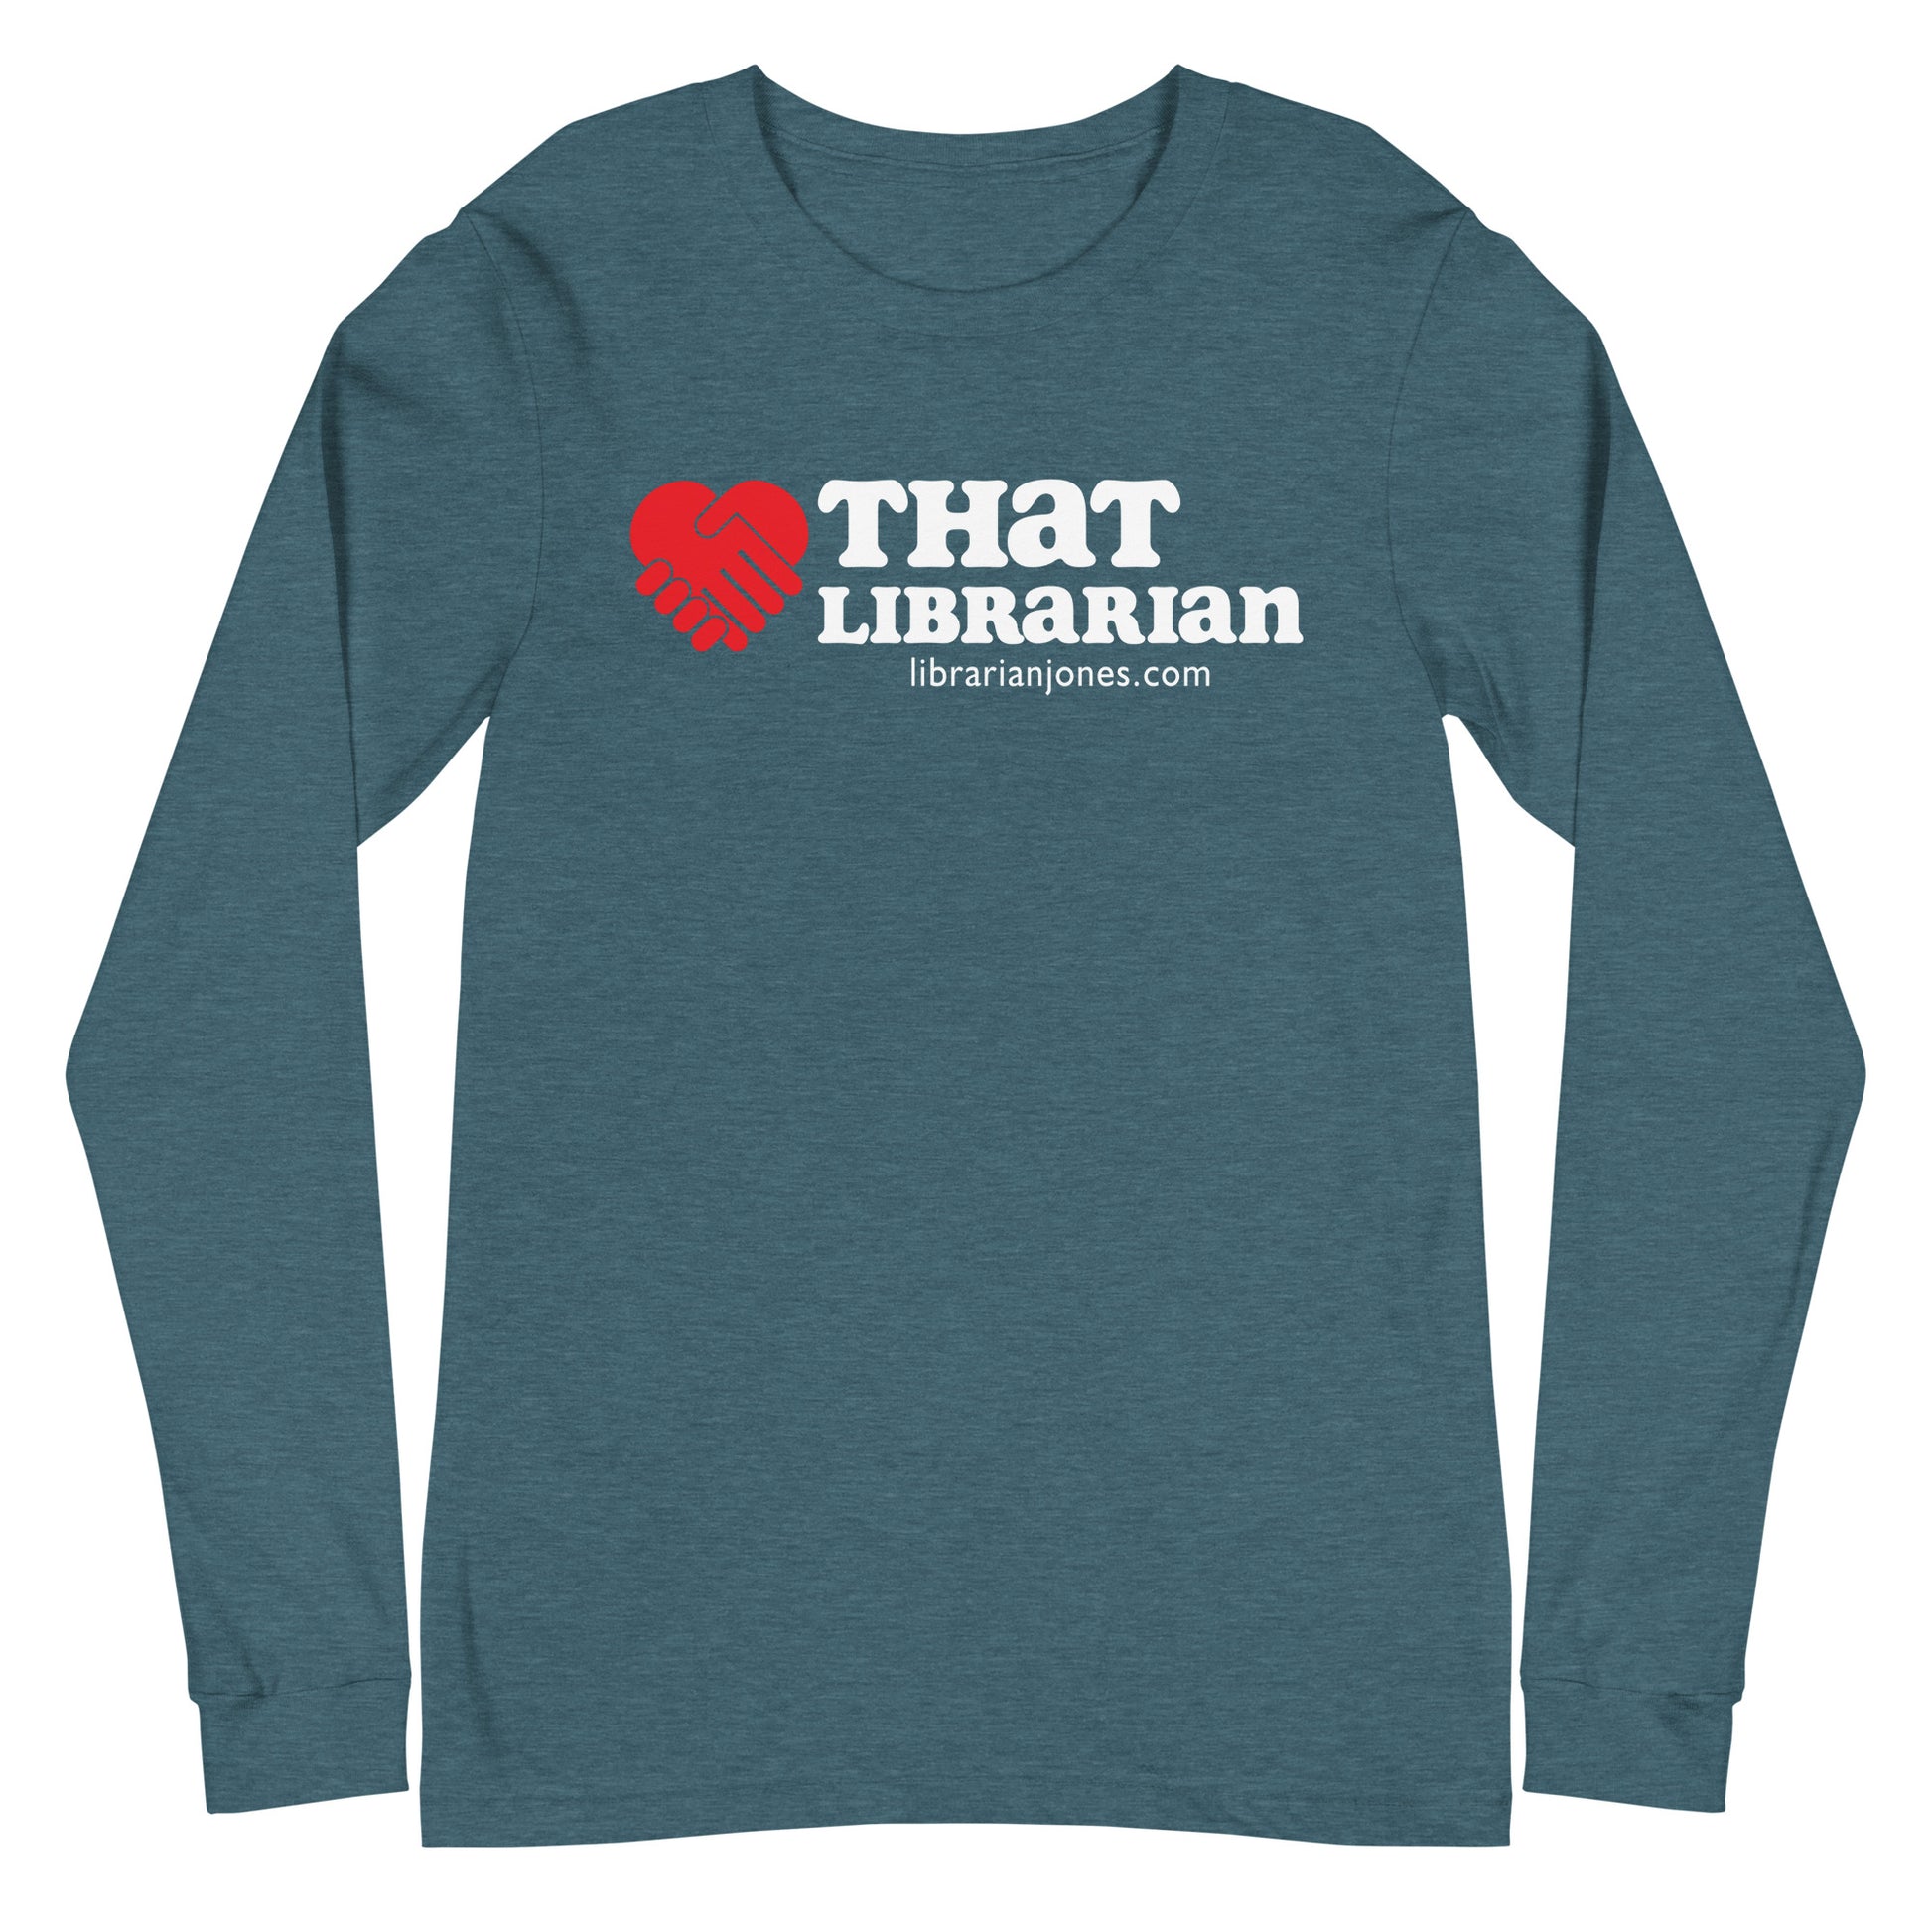 That Librarian Long Sleeve T-shirt - Heather Teal